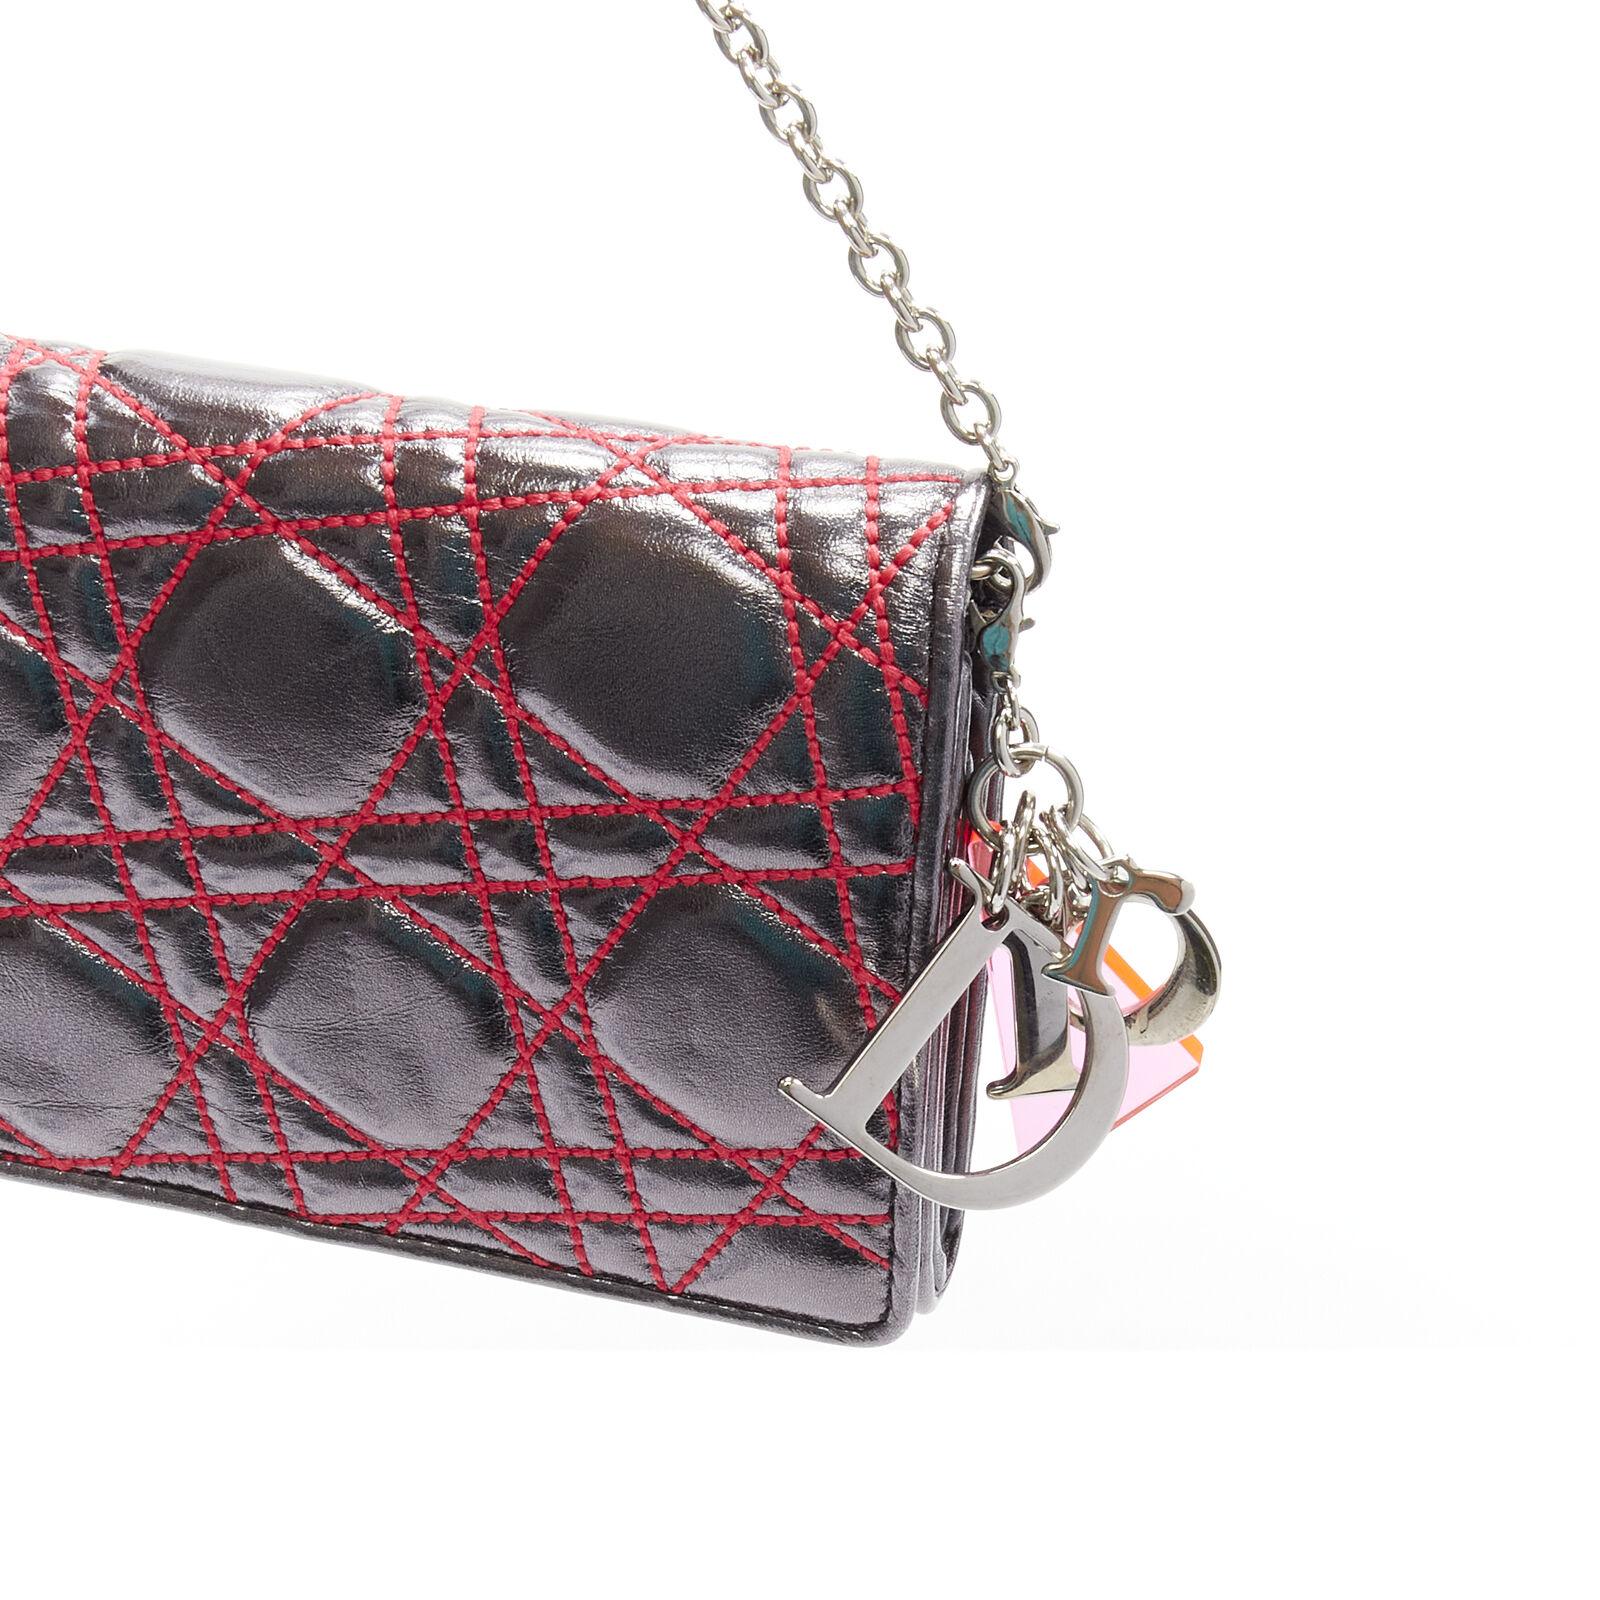 CHRISTIAN DIOR 2011 Anselm Reyle silver neon pink Cannage wallet on chain bag 3